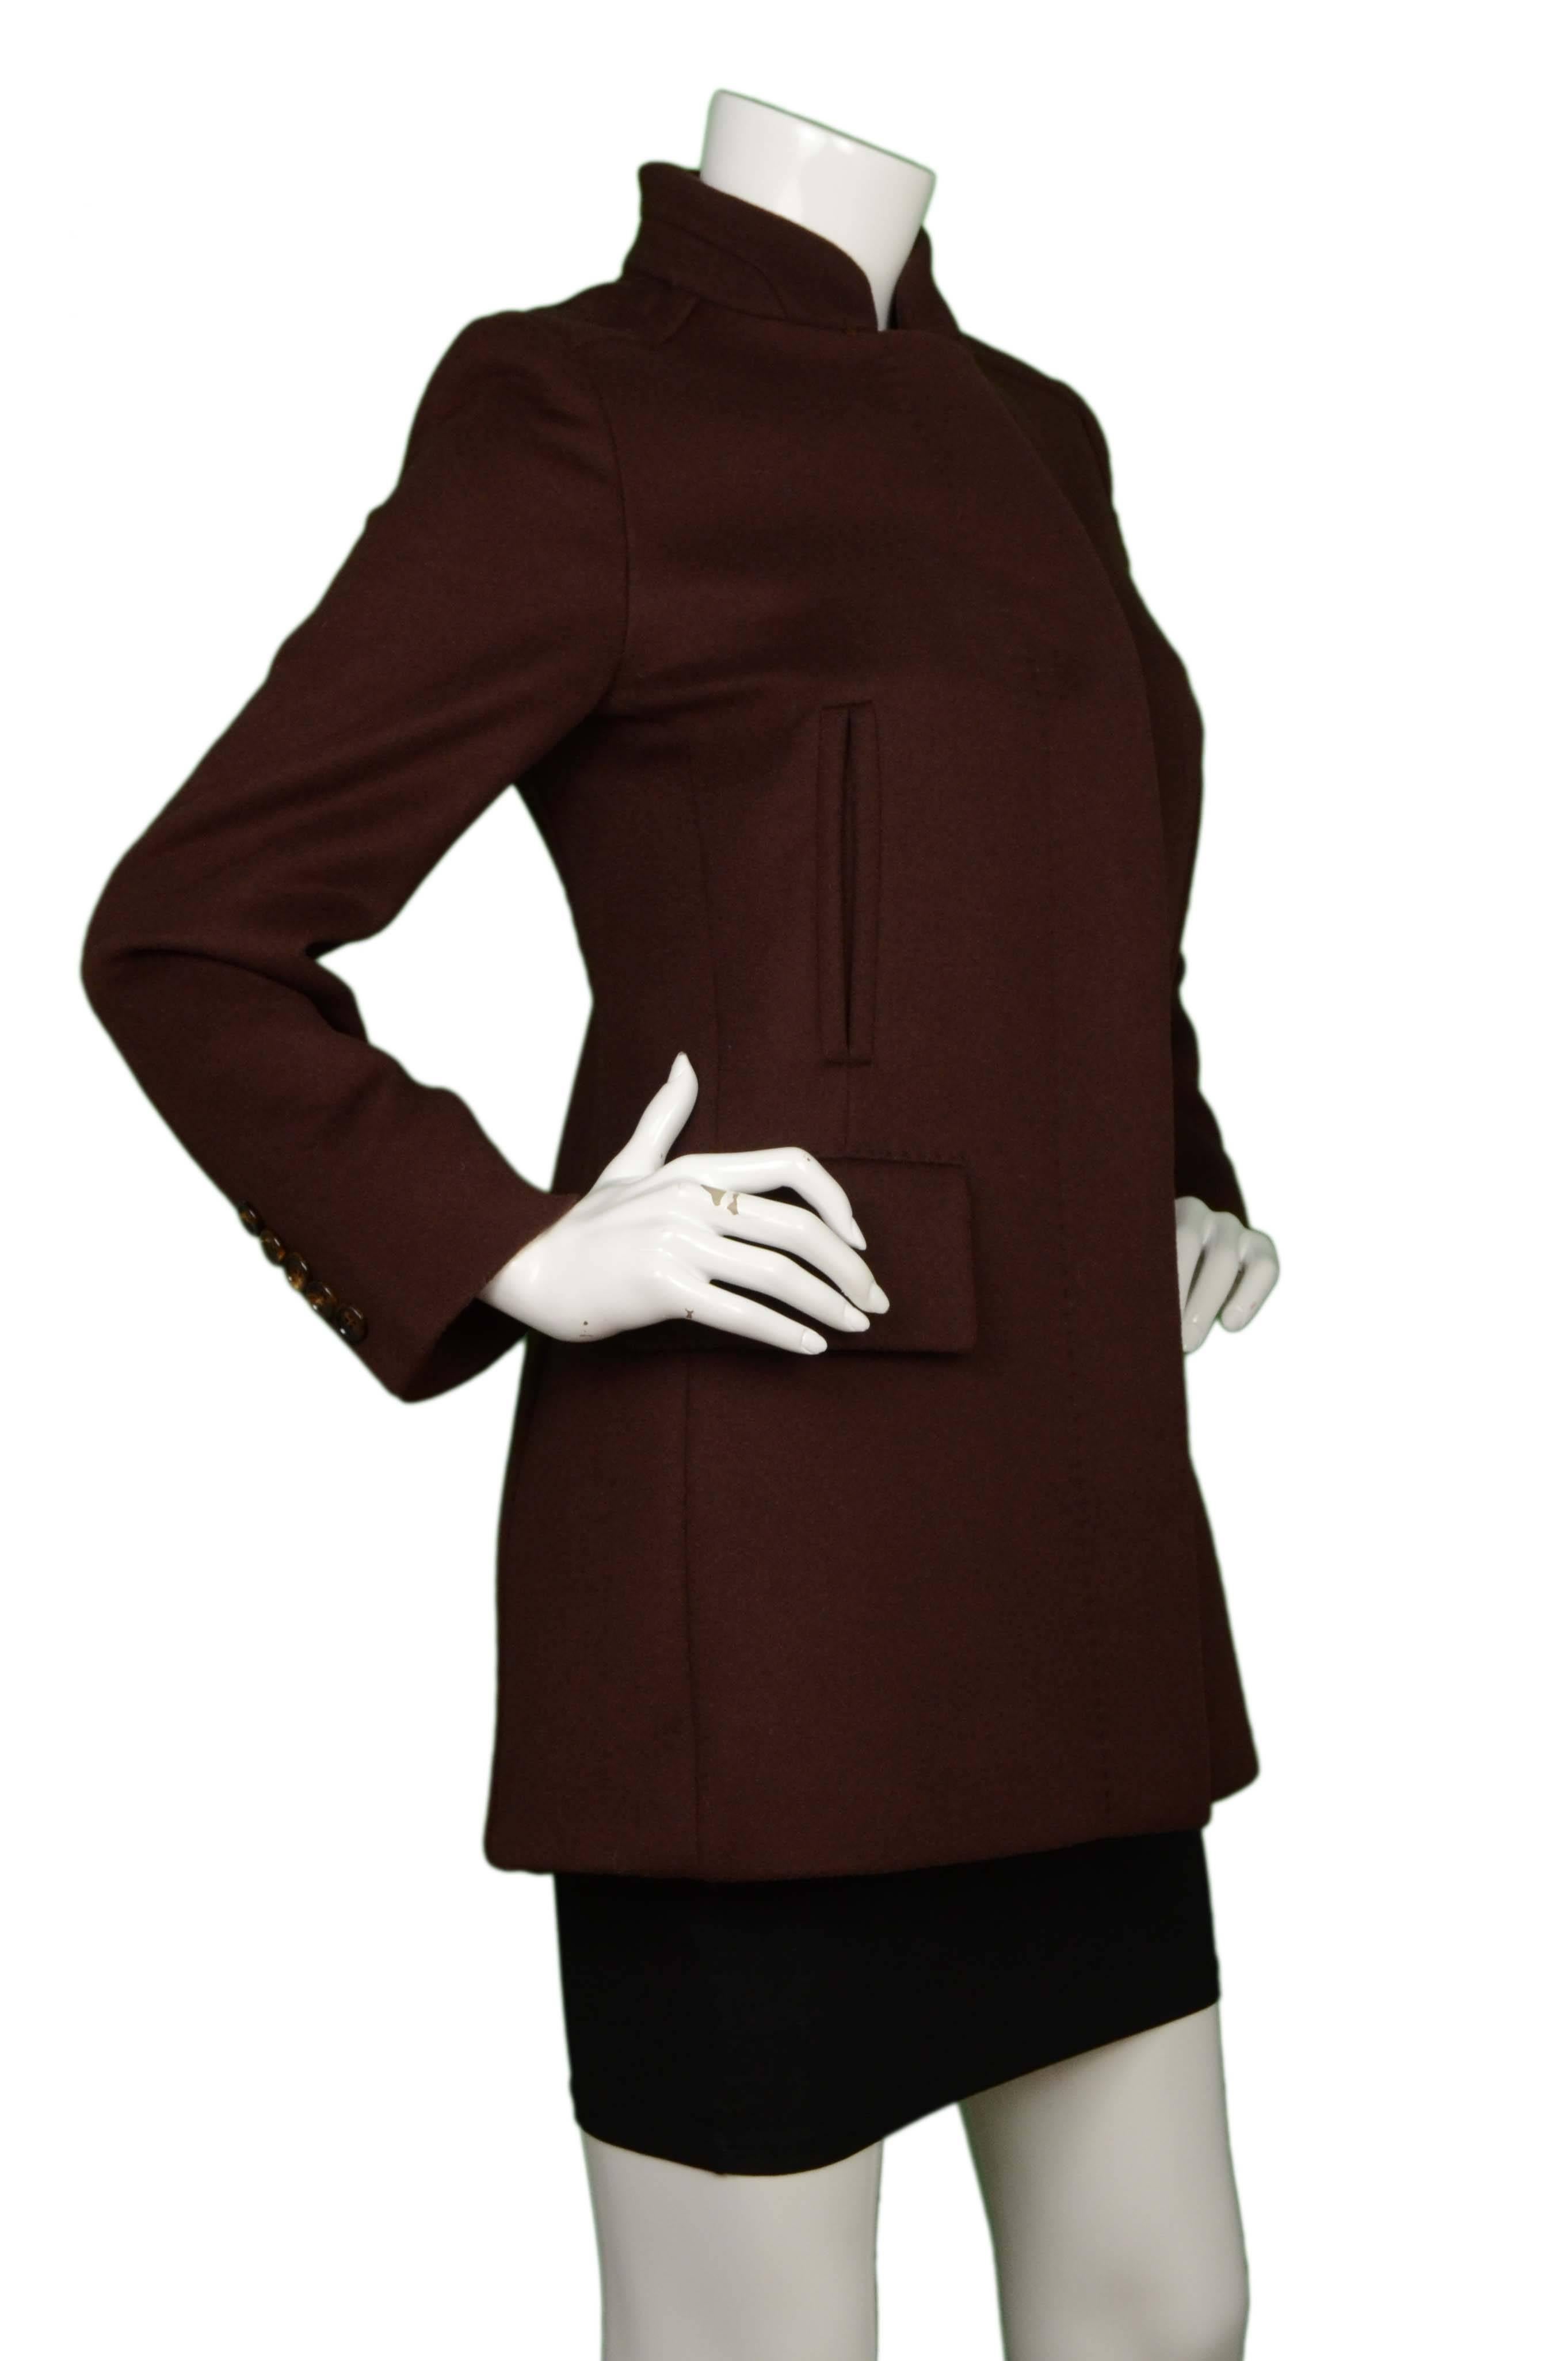 Max Mara Brown Single Breasted Wool Coat
Made In: Italy
Color: Brown
Composition: 90% wool, 10% cashmere
Lining: 70% acetate, 30% rayon
Closure/Opening: Single breasted button down closure
Exterior Pockets: Two slit pocket and two flap